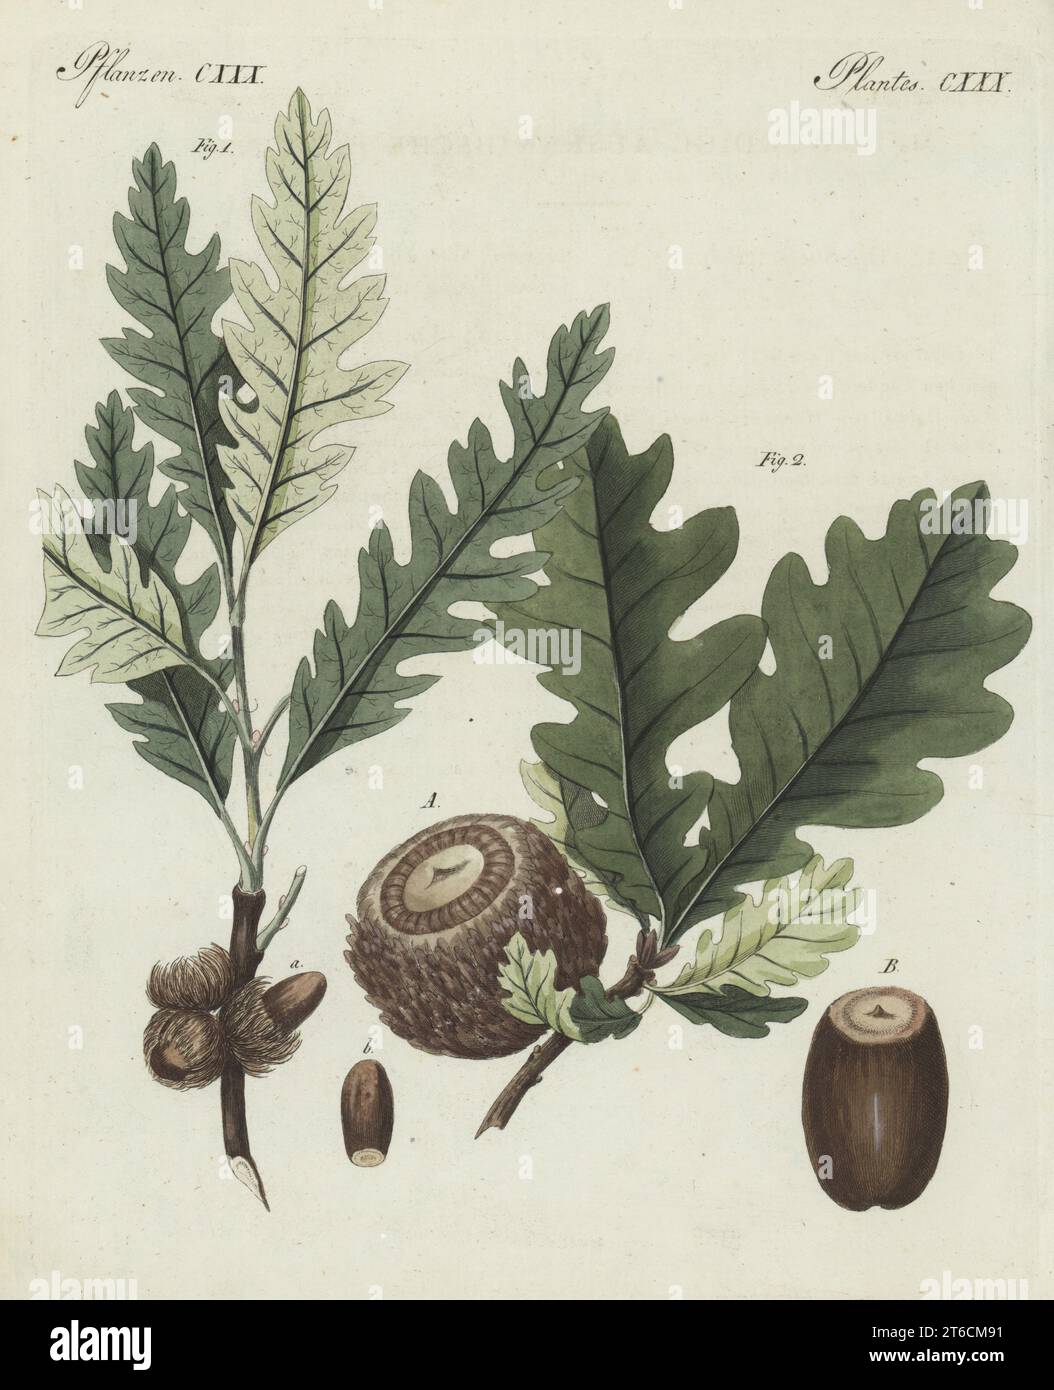 Sessile oak, Quercus petraea 1, and Valonia oak, Quercus ithaburensis subsp. macrolepis 2. Speisefrucht-Eiche, chene grec, Quercus esculus, Knopper-Eiche, chene a grosses cupules, Quercus aegilops. The botanicals were drawn by Henriette and Conrad Westermayr, F. Götz and C. Ermer. Handcoloured copperplate engraving from Carl Bertuch's Bilderbuch fur Kinder (Picture Book for Children), Weimar, 1810. A 12-volume encyclopedia for children illustrated with almost 1,200 engraved plates on natural history, science, costume, mythology, etc., published from 1790-1830. Stock Photo